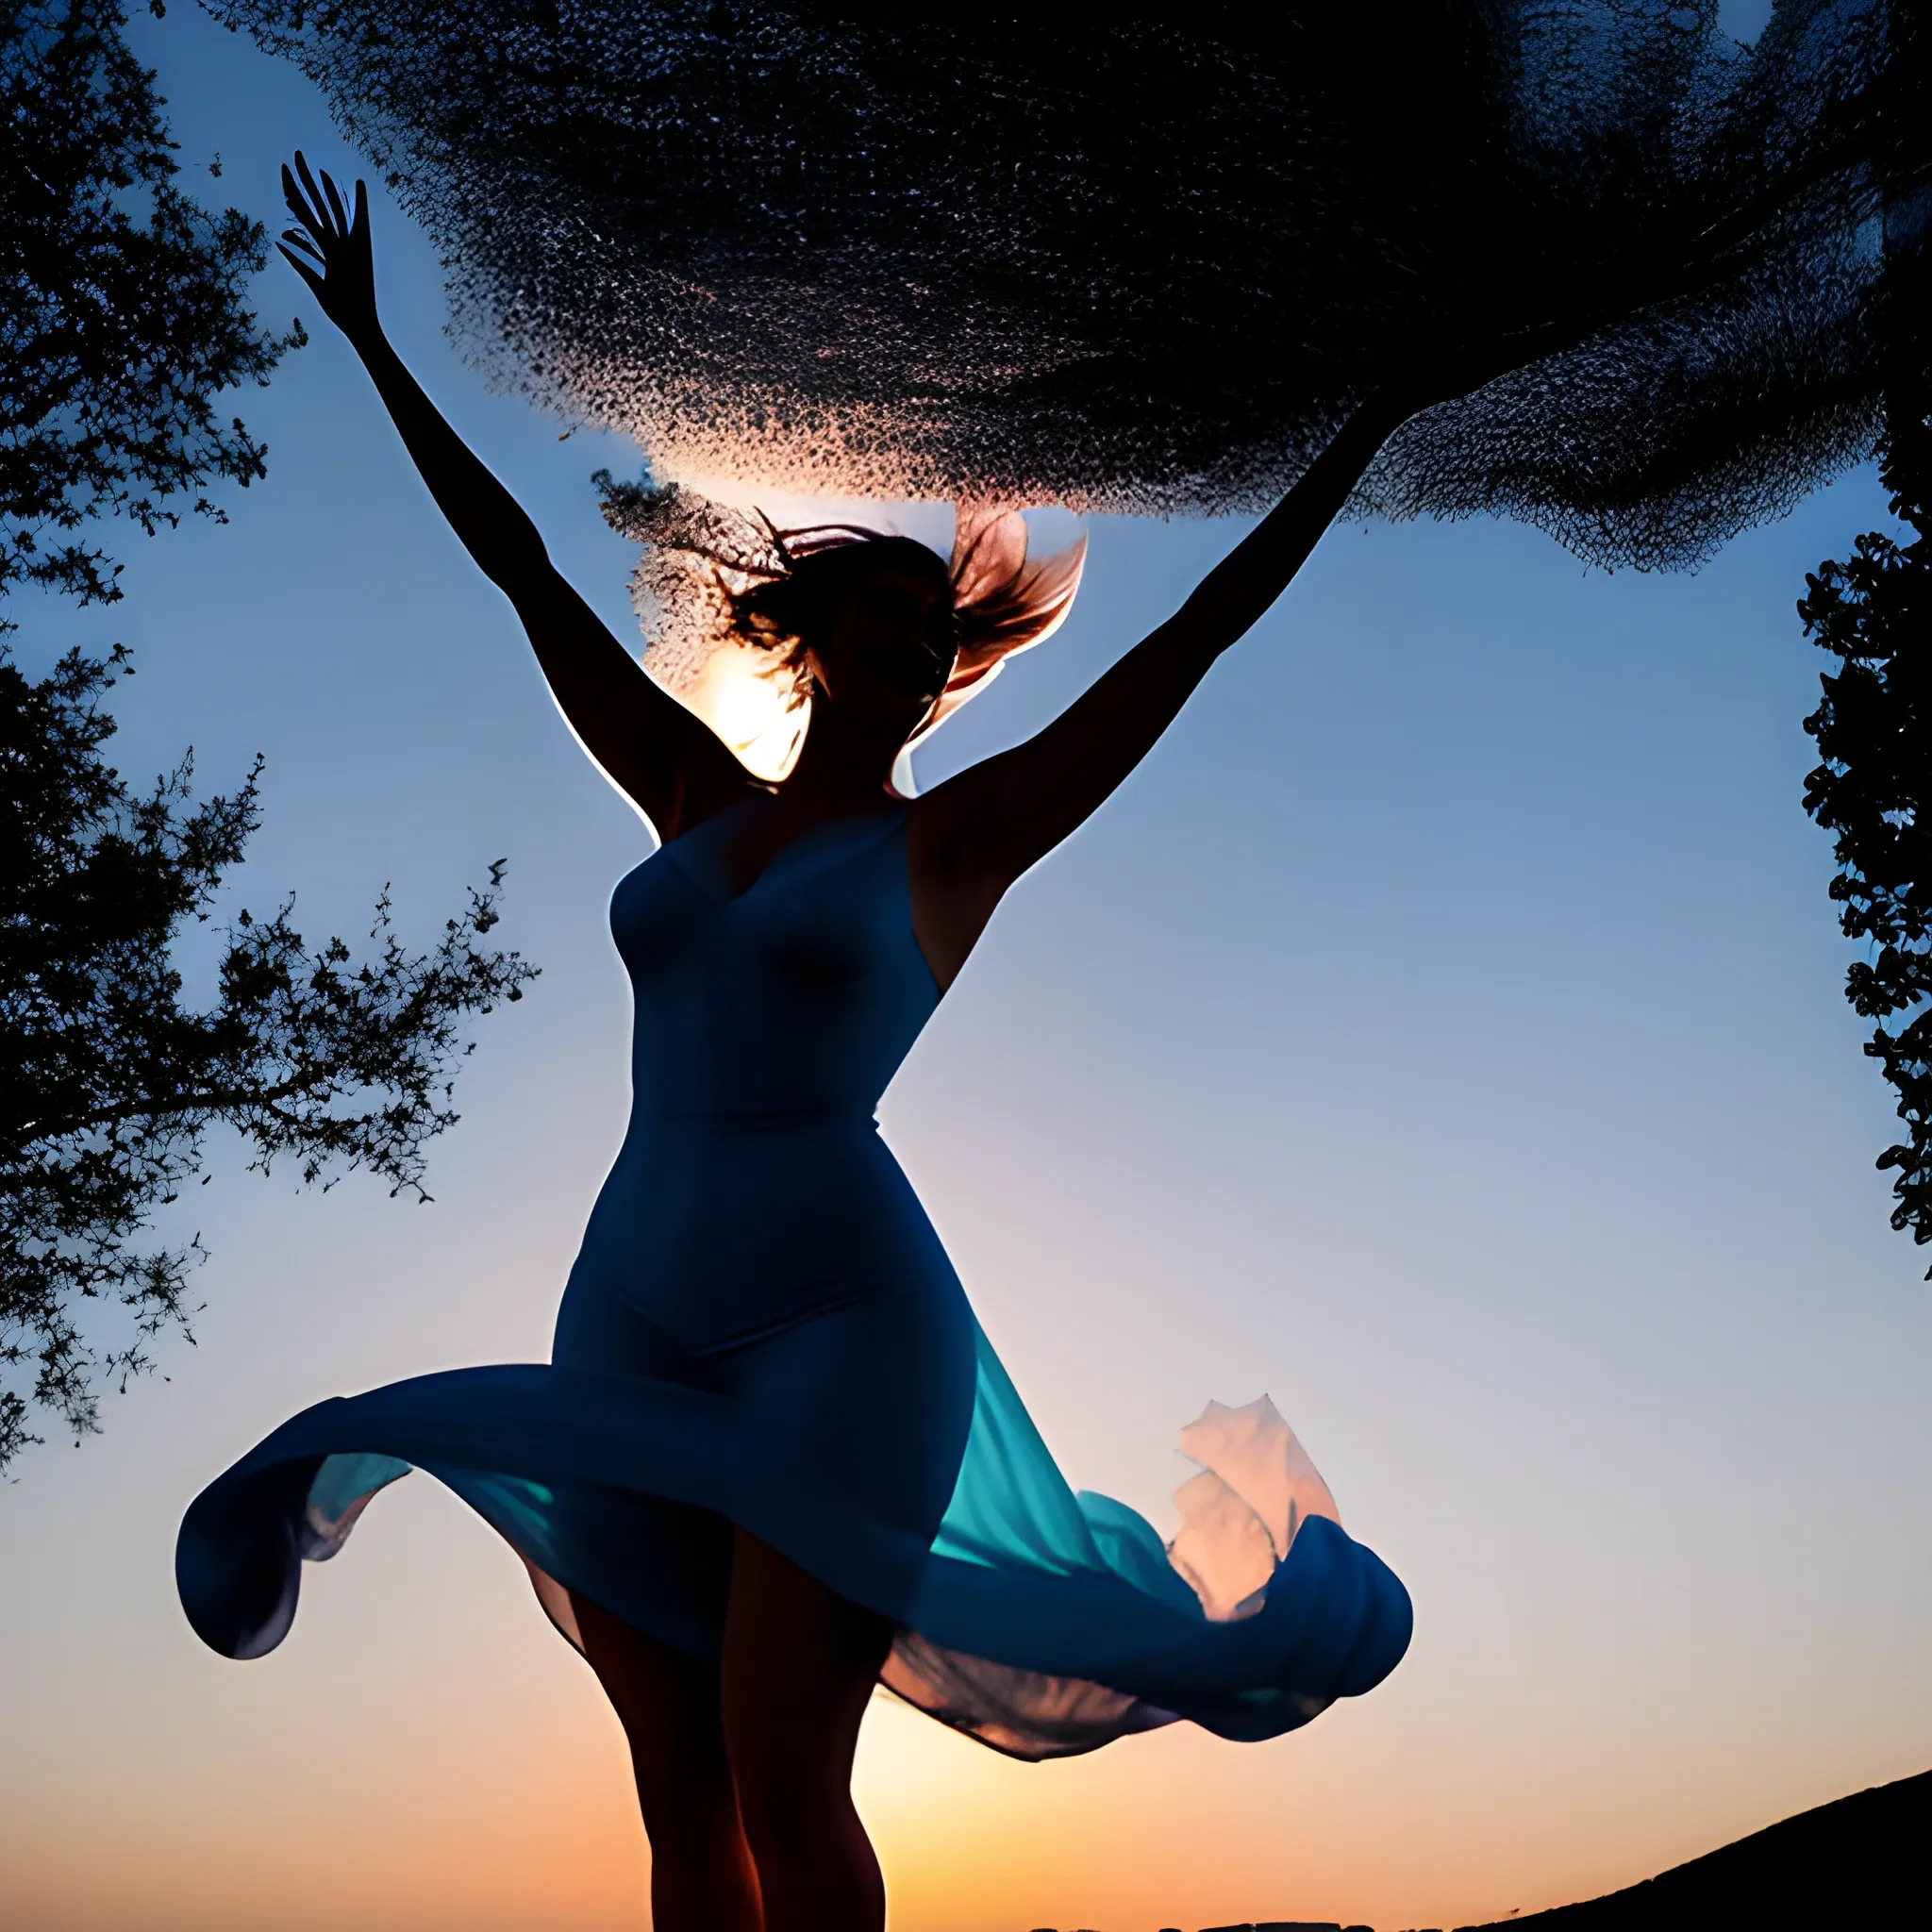 Using a long lens in the blue light of dusk, photograph the silhouette of the girl as she dances among billowing sheets hung out to dry. Her slender limbs twirl gracefully while her nightgown and streaming hair flare out around her. Only the curves of her smiling face are visible facing the fading sun.